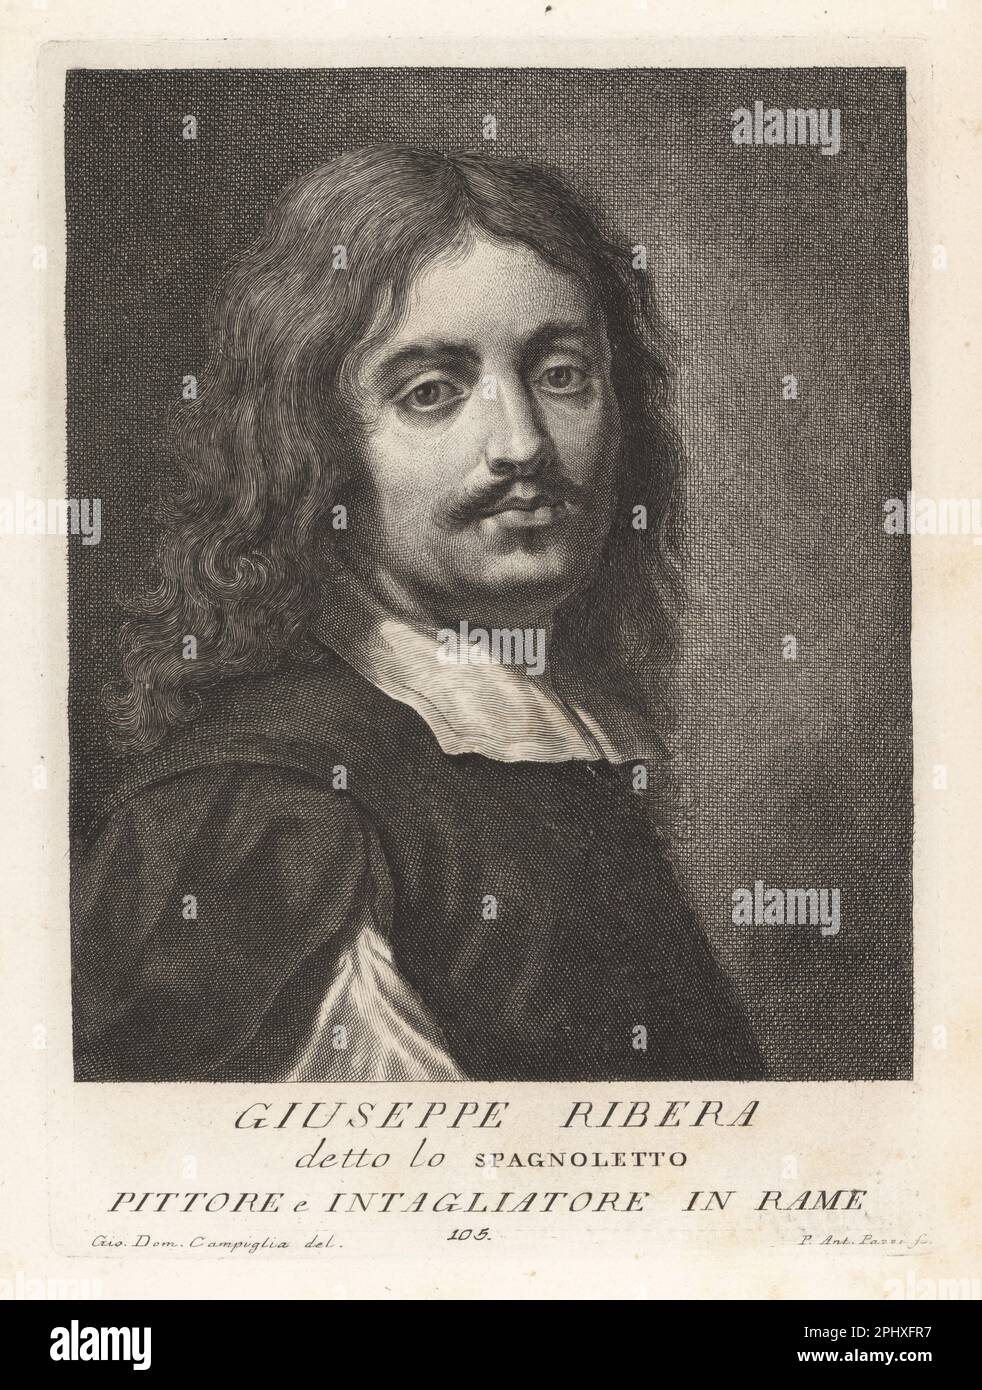 Luca Giordano, Italian late-Baroque painter and printmaker, 1634-1705. Identified by Nicola Spinosa in 2006. (Mislabeled Giuseppe de Ribera or Jose de Ribera, painter and printmaker, known as lo Spagnoletto.) Copperplate engraving by Pietro Antonio Pazzi after Giovanni Domenico Campiglia after a self portrait by the artist from Francesco Moucke's Museo Florentino (Museum Florentinum), Serie di Ritratti de Pittori (Series of Portraits of Painters) stamperia Mouckiana, Florence, 1752-62. Stock Photo